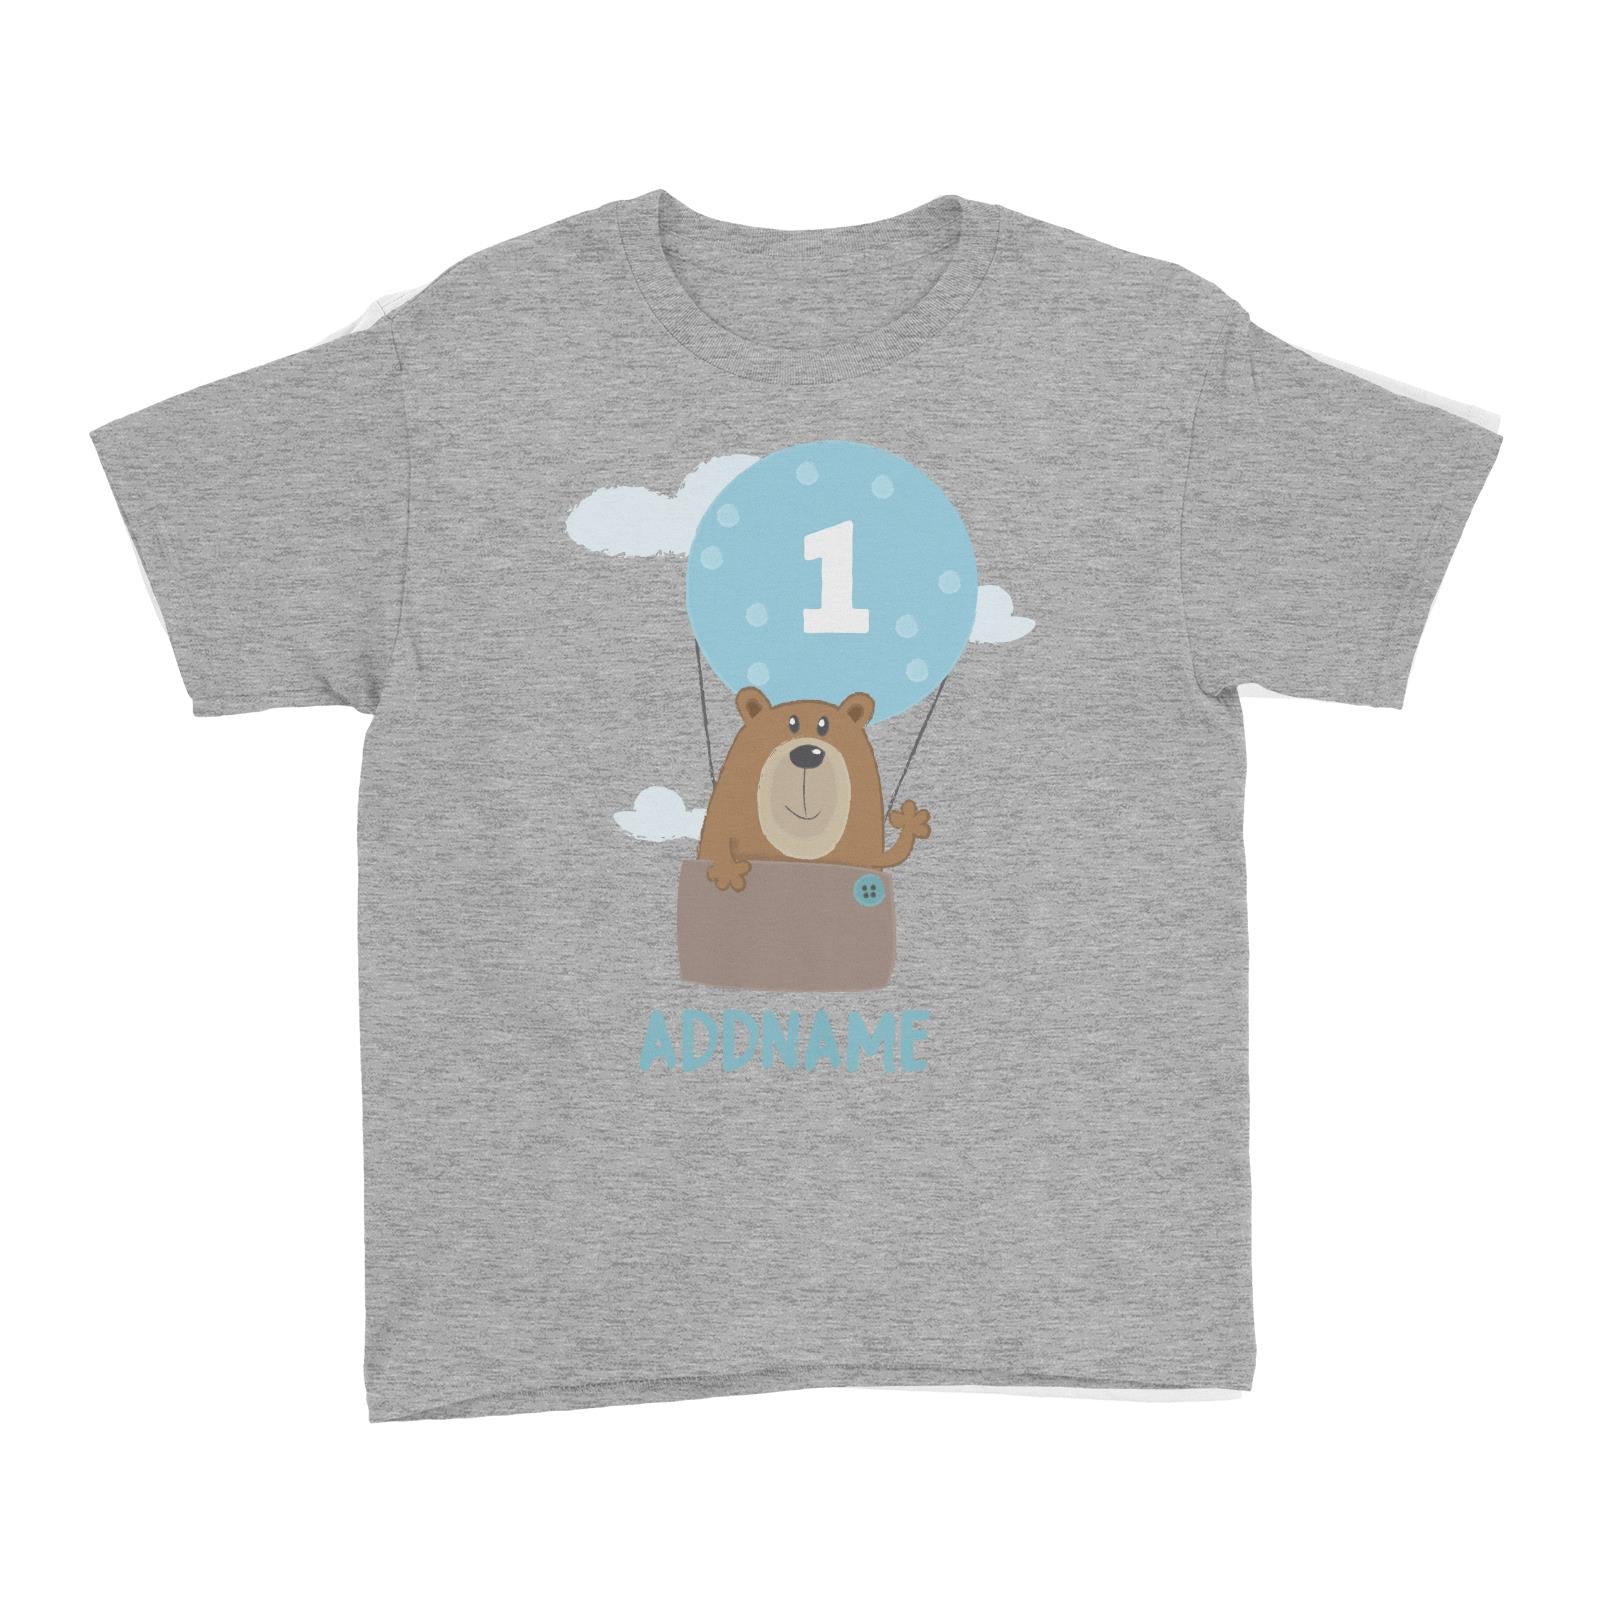 Cute Bear Boy with Hot Air Balloon Birthday Theme Personalizable with Name and Number Kid's T-Shirt